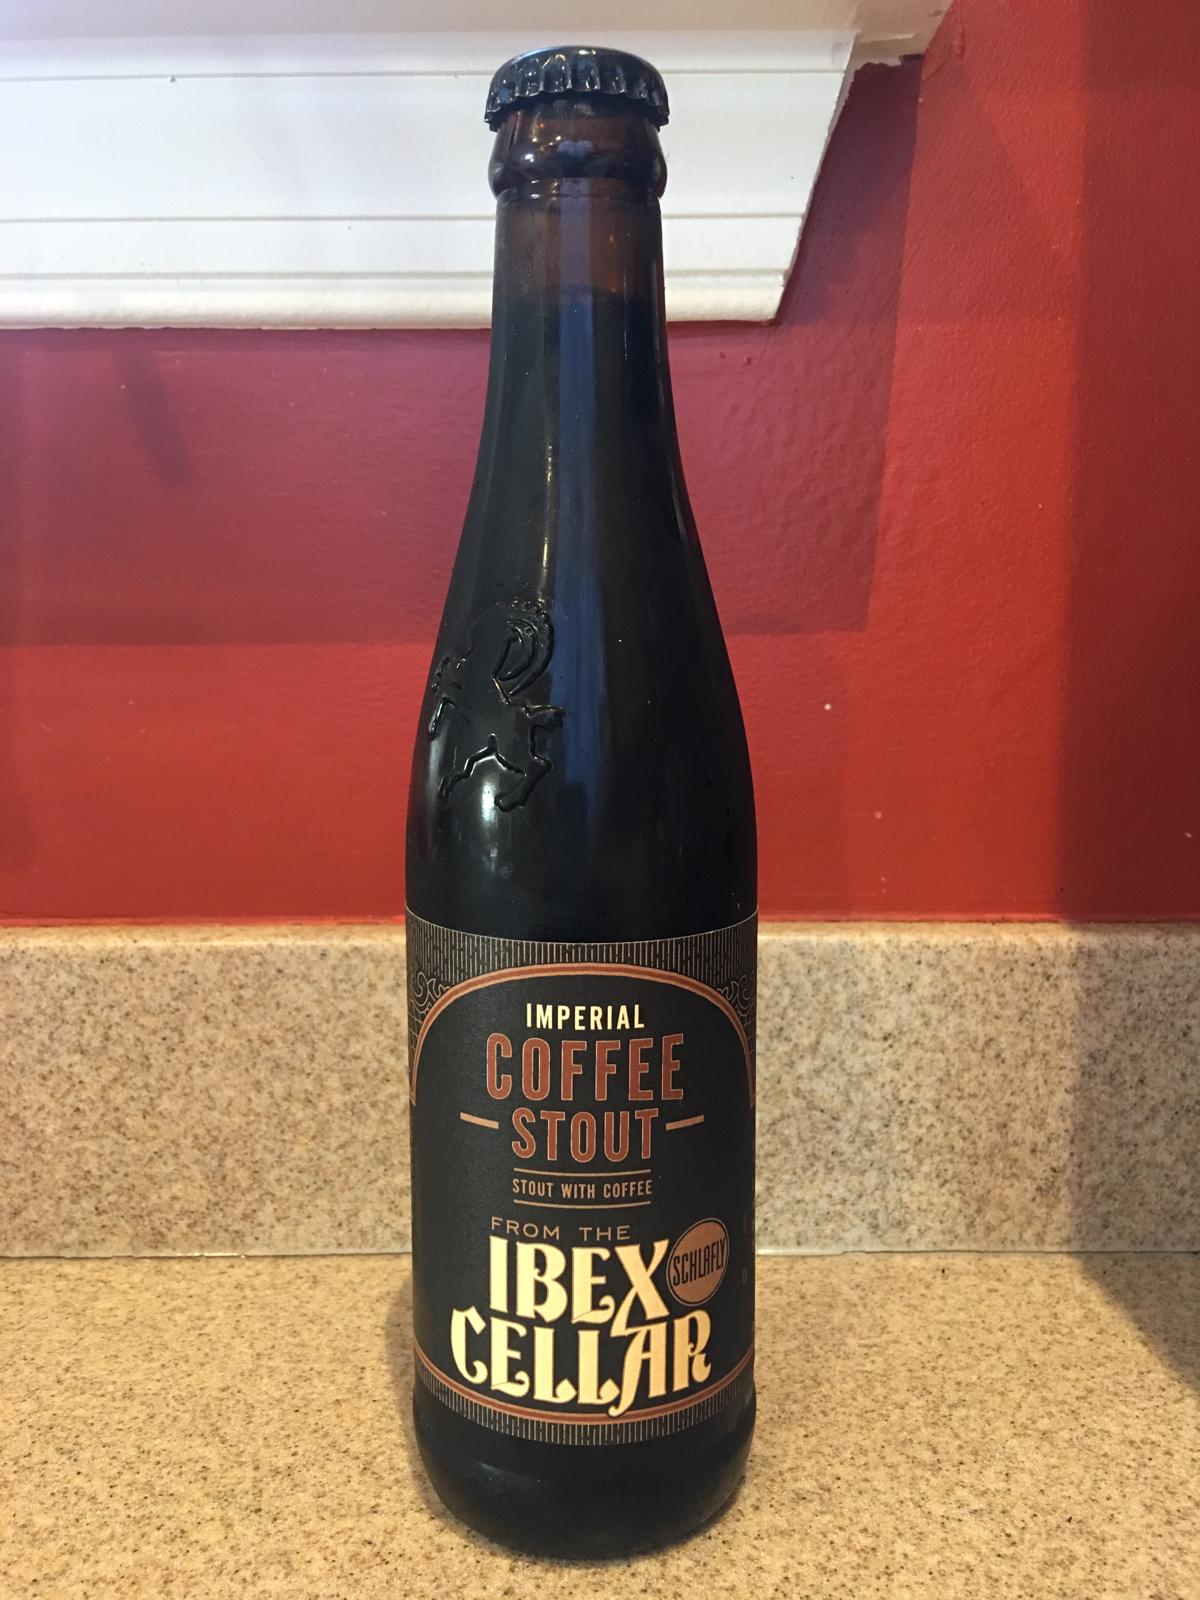 From The Ibex Cellar: Imperial Coffee Stout